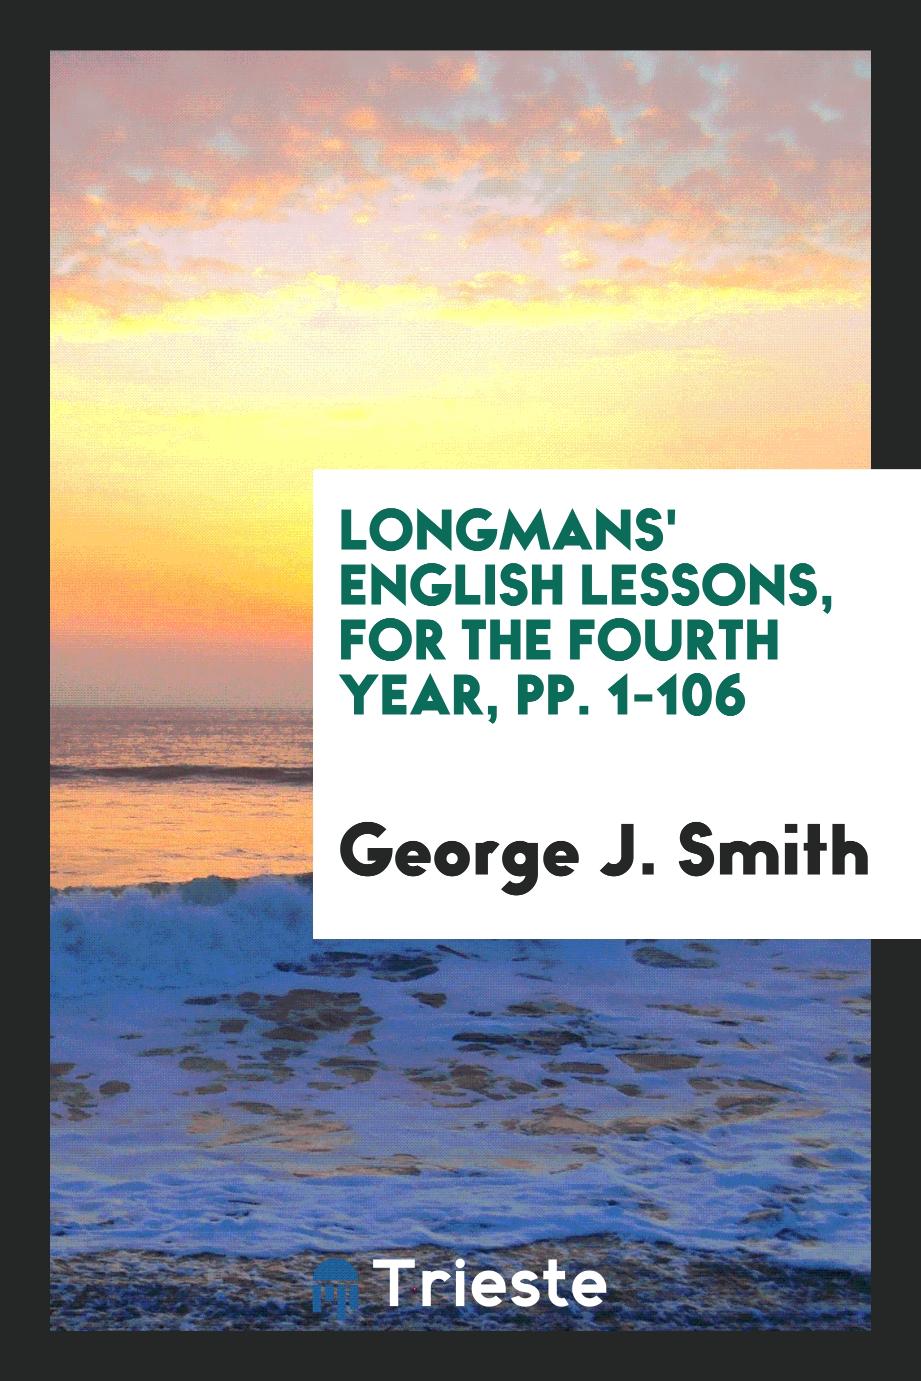 Longmans' English Lessons, for the Fourth Year, pp. 1-106